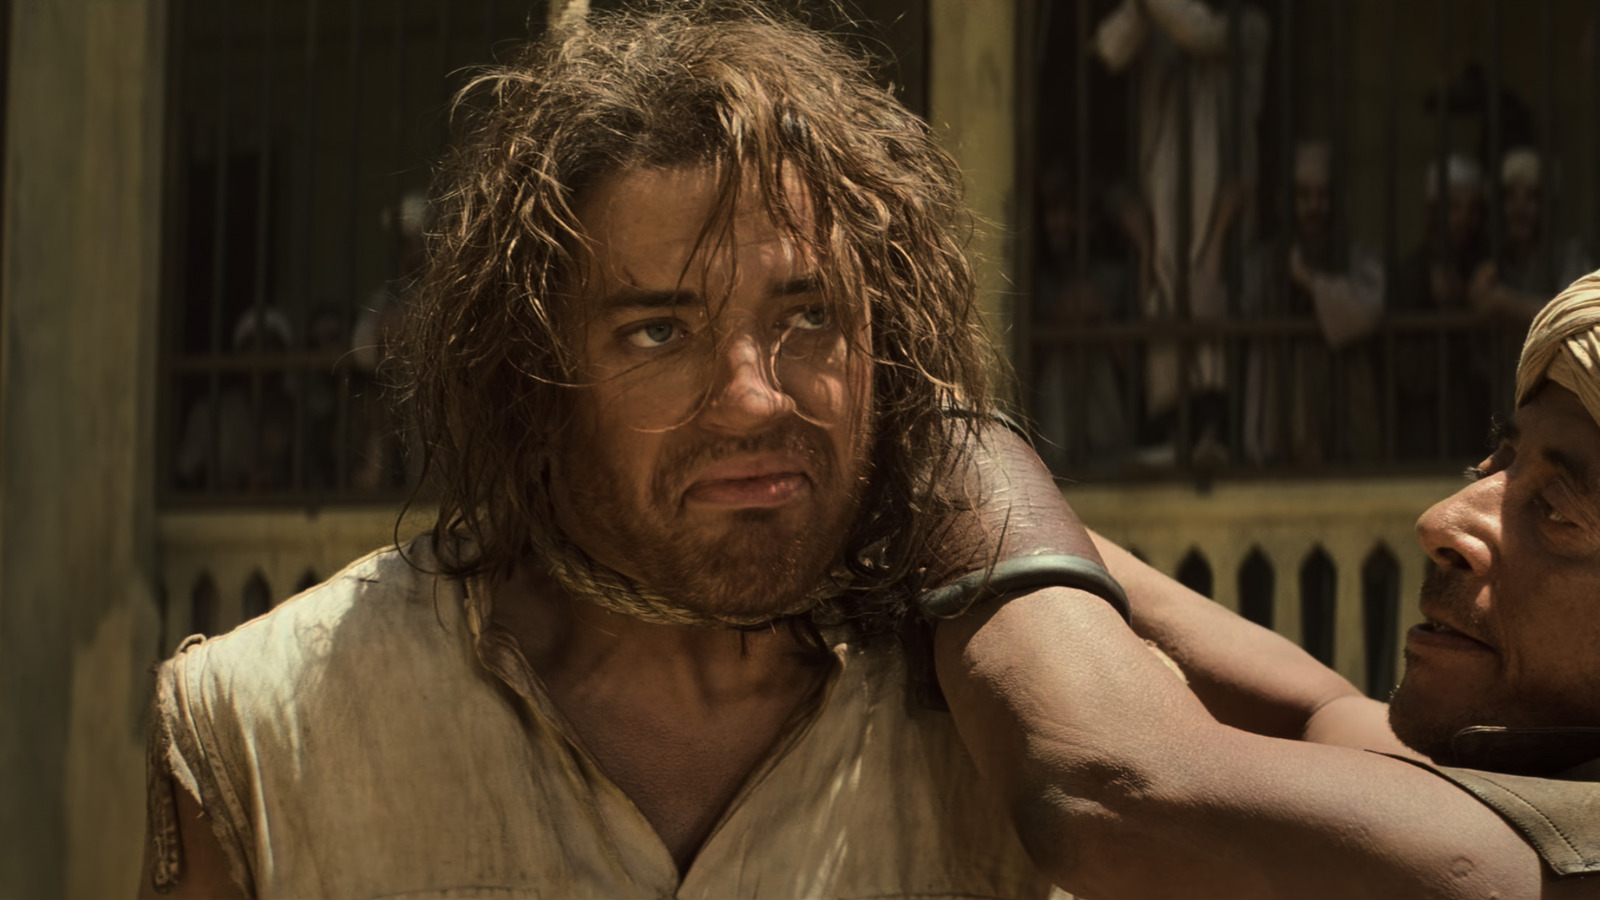 Brendan Fraser Nearly Knocked Out Performing Risky Stunt on 'The Mummy' Set